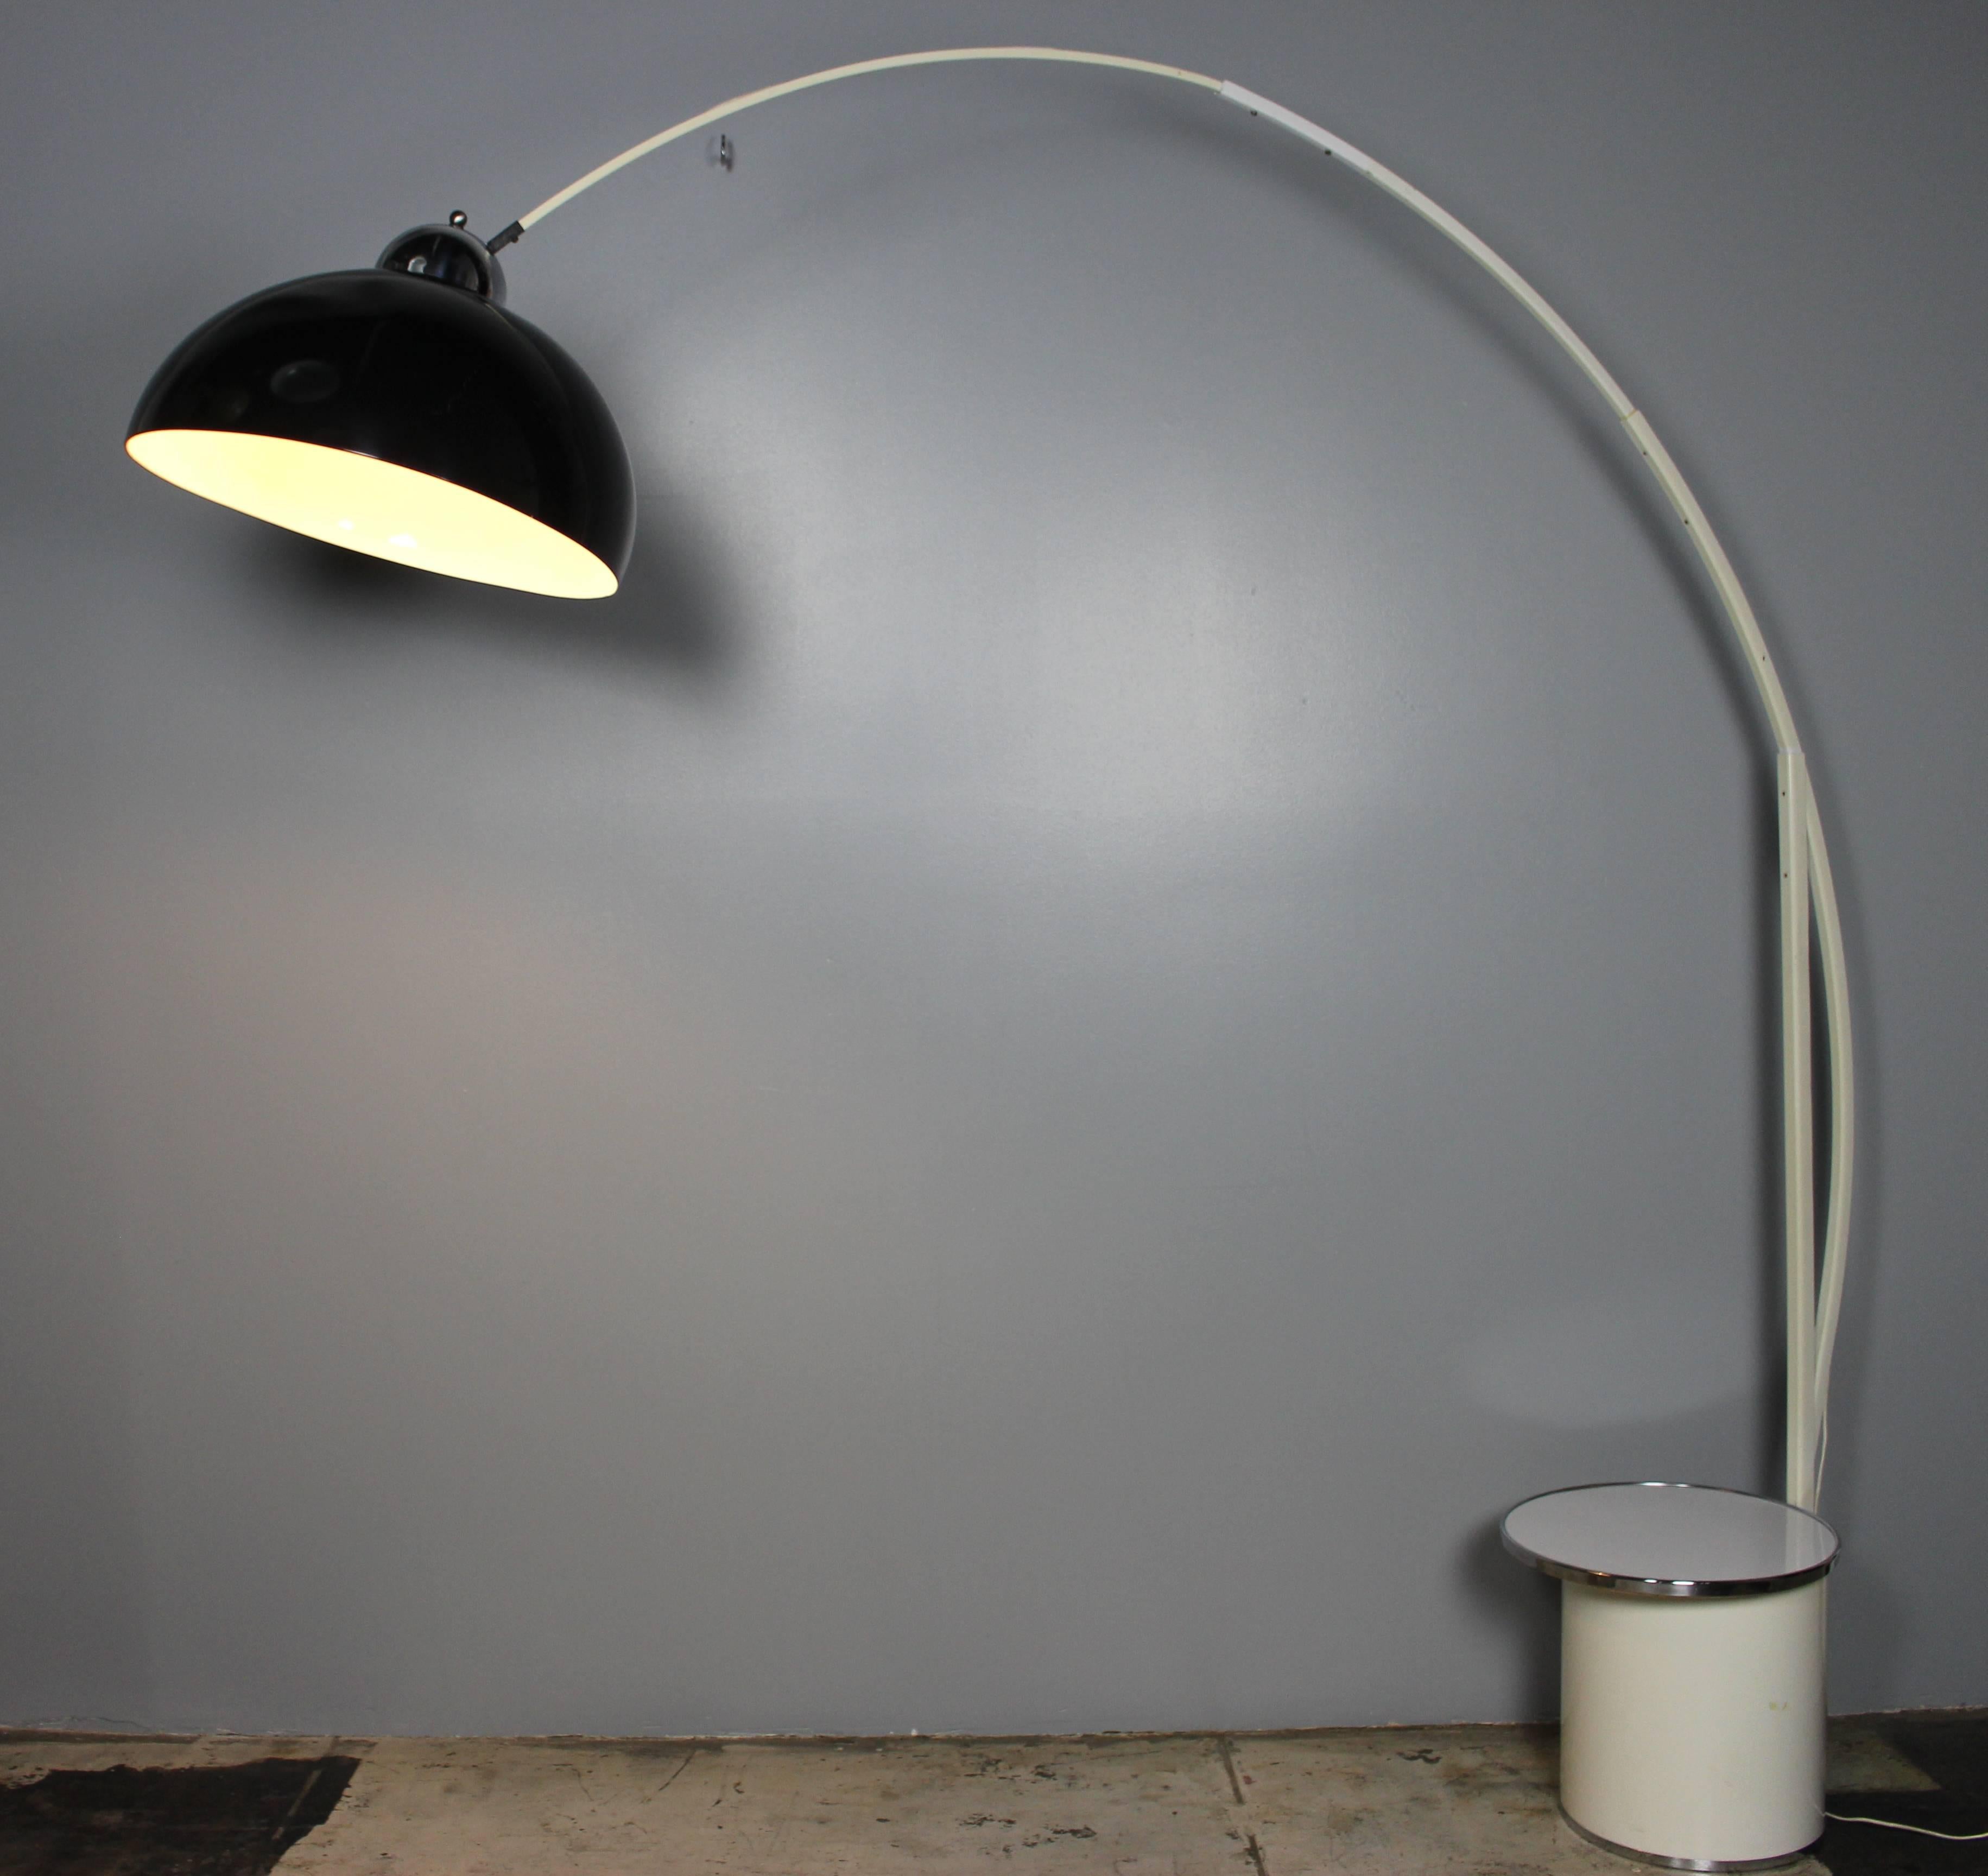 A large Italian 1970s floor lamp with the small cocktail table. Table is 16 inches in diameter.

Pls note: Item is located at Beverly Store
7274 Beverly Blvd 
Los Angeles, CA 90036
